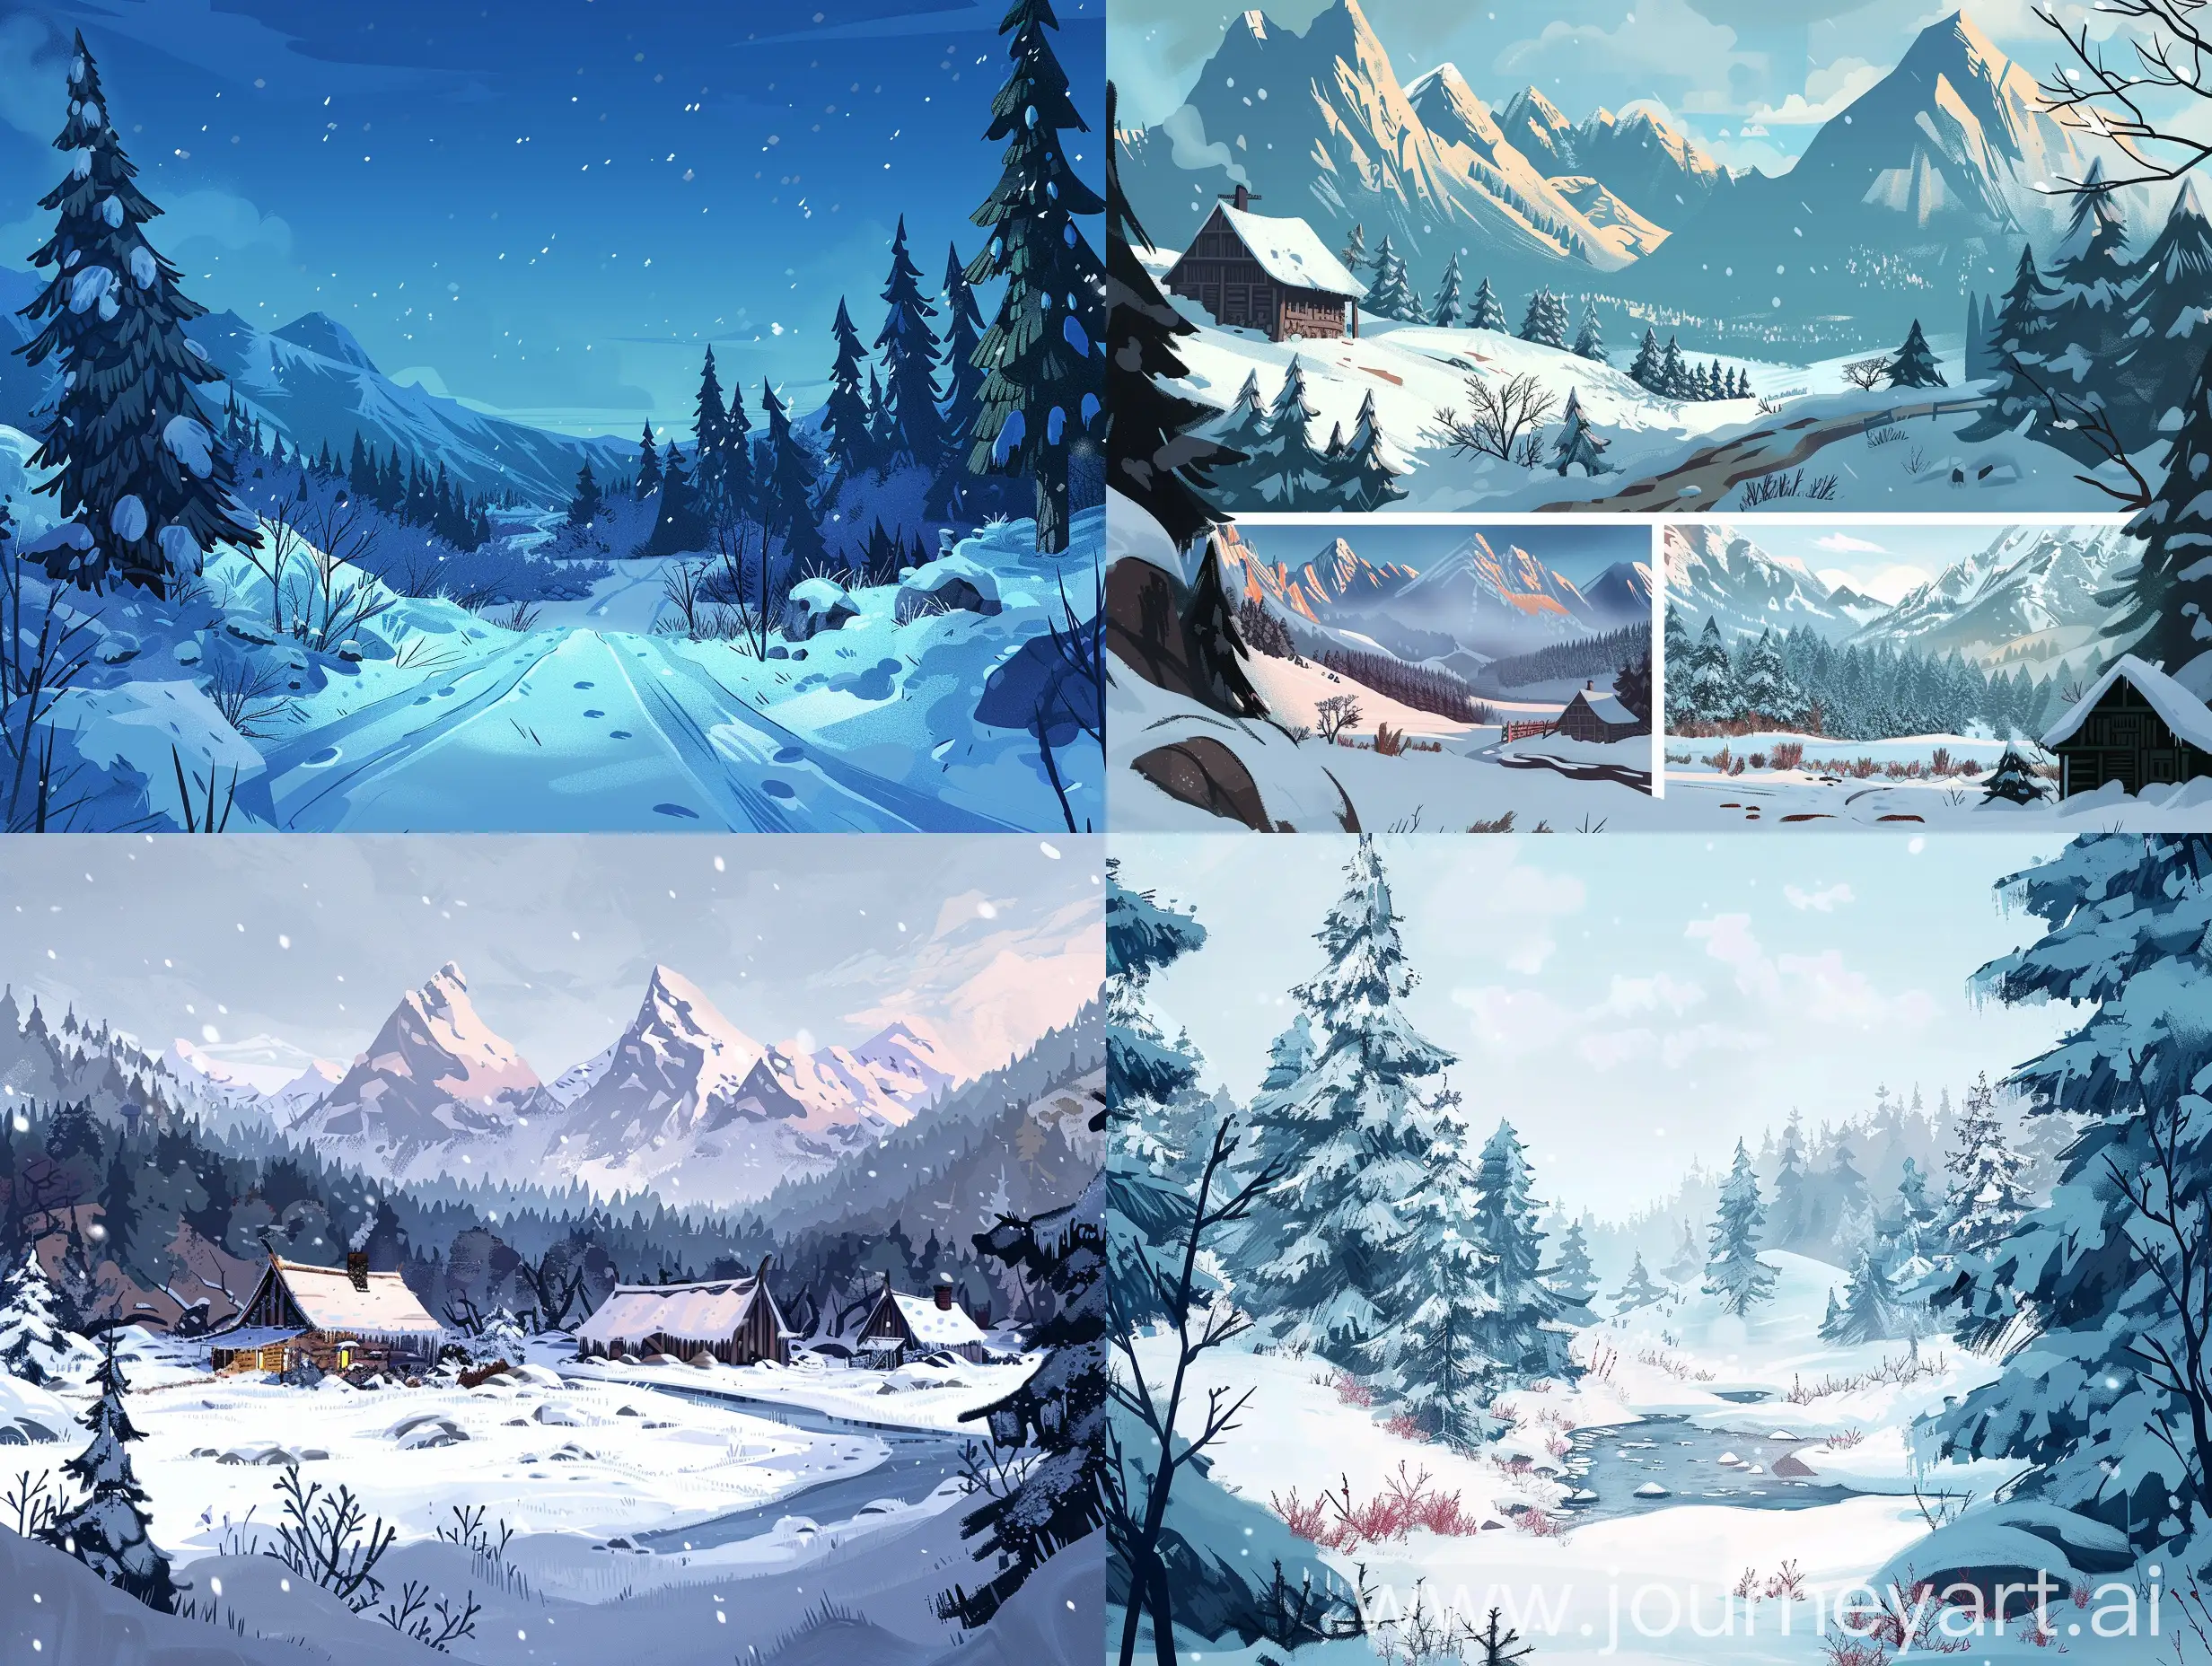 Winter-Landscapes-Inspired-by-The-Long-Dark-Game-Atmospheric-Scenery-in-Matching-Style-and-Palette